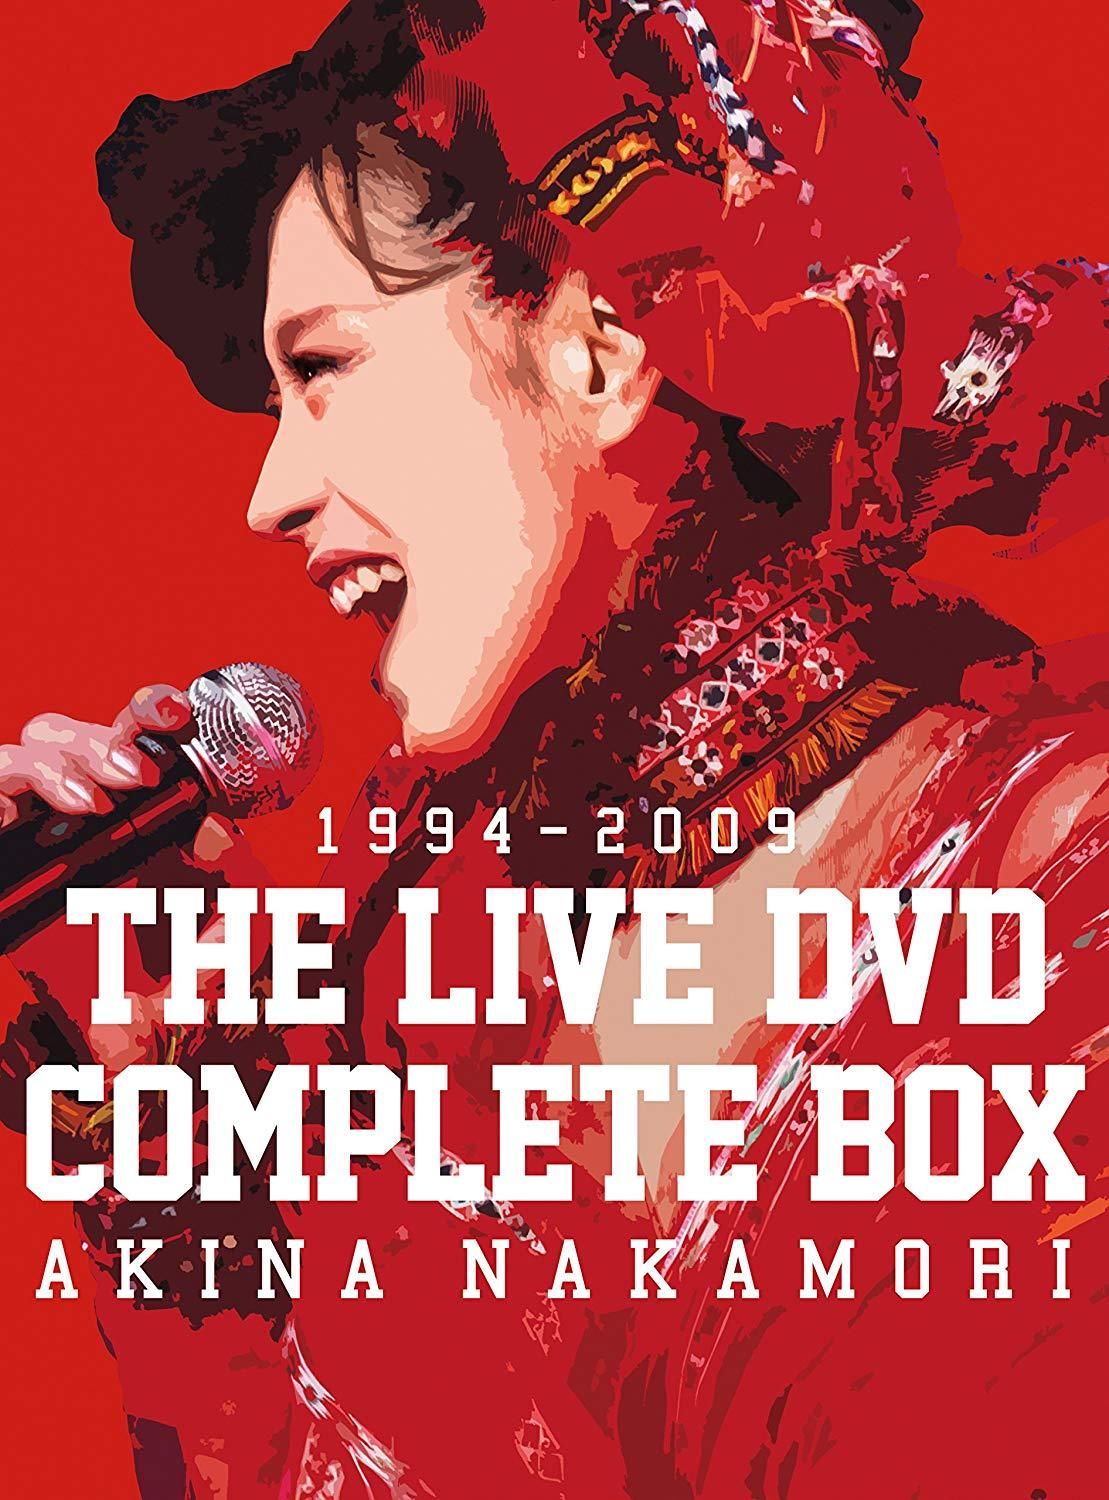 X THE LIVE DVD COMPLETE BOX X